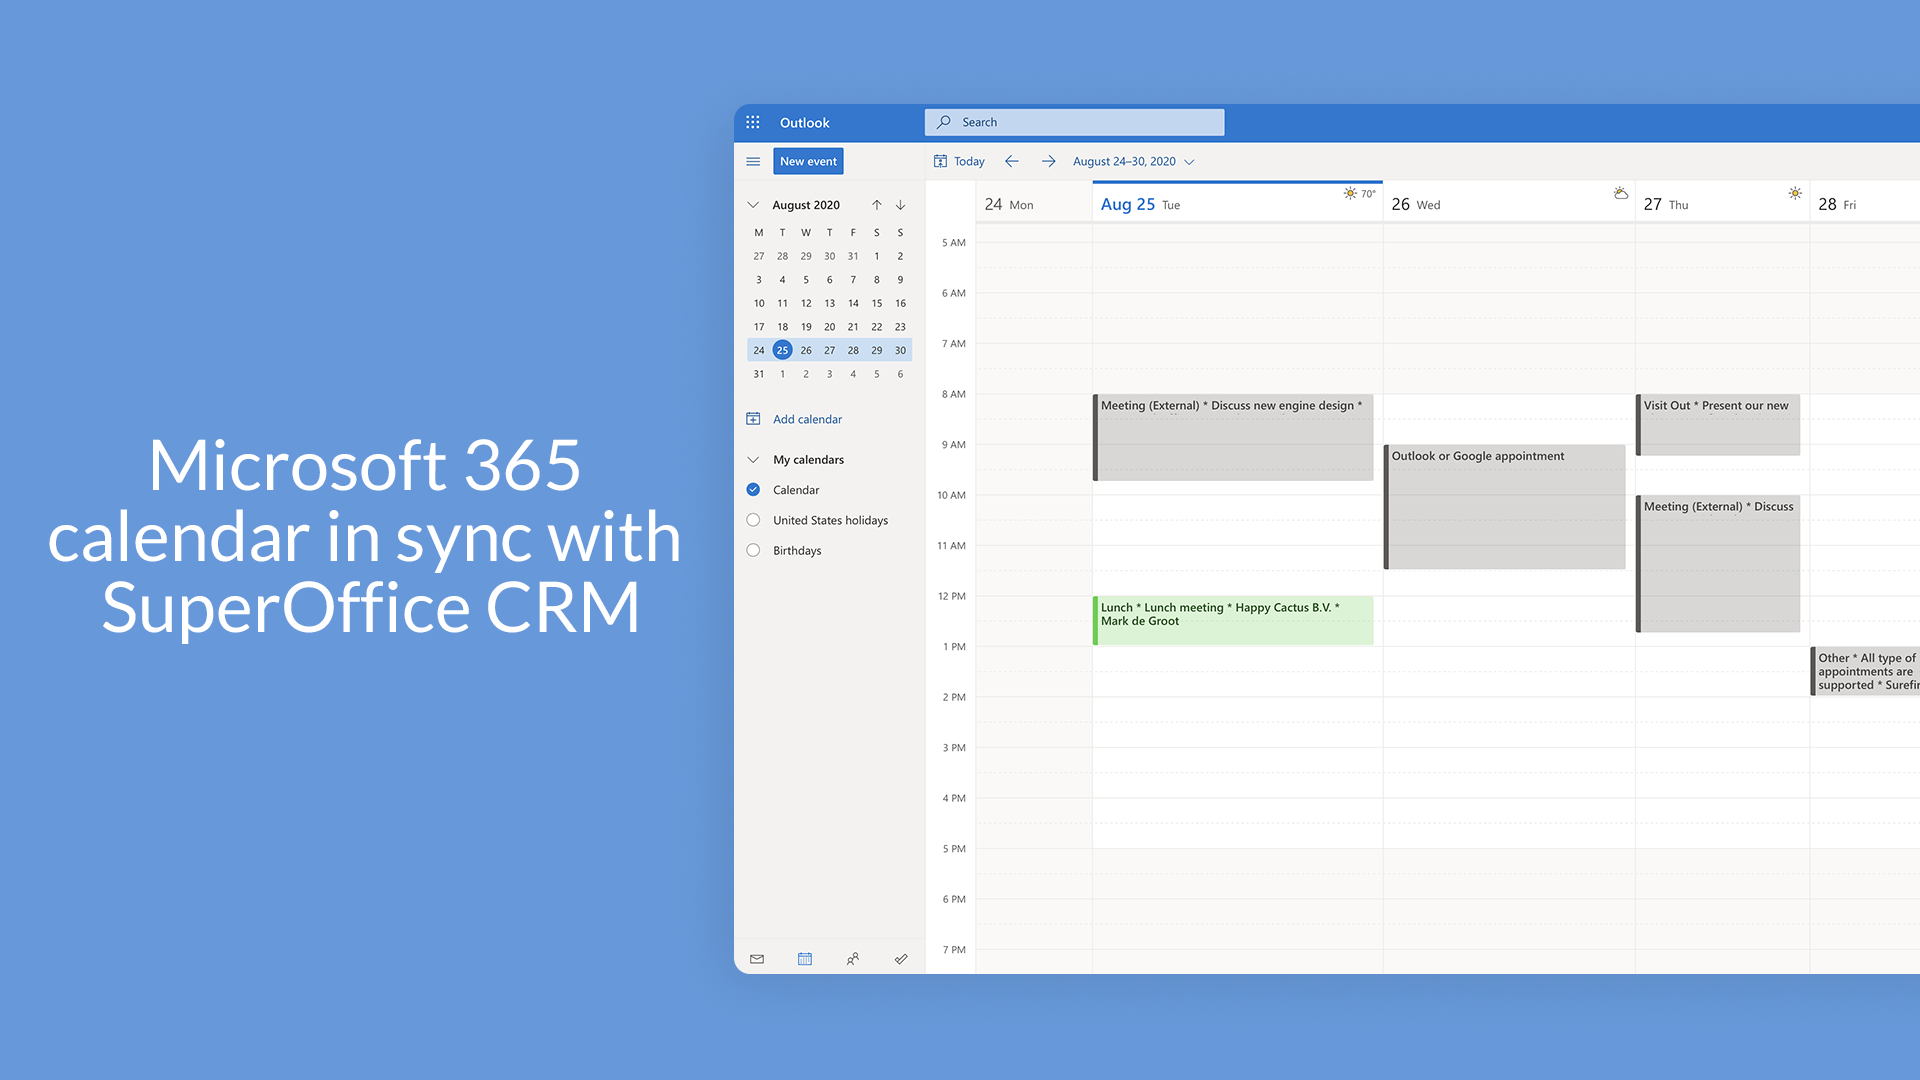 Microsoft 365 calendar in sync with SuperOffice CRM